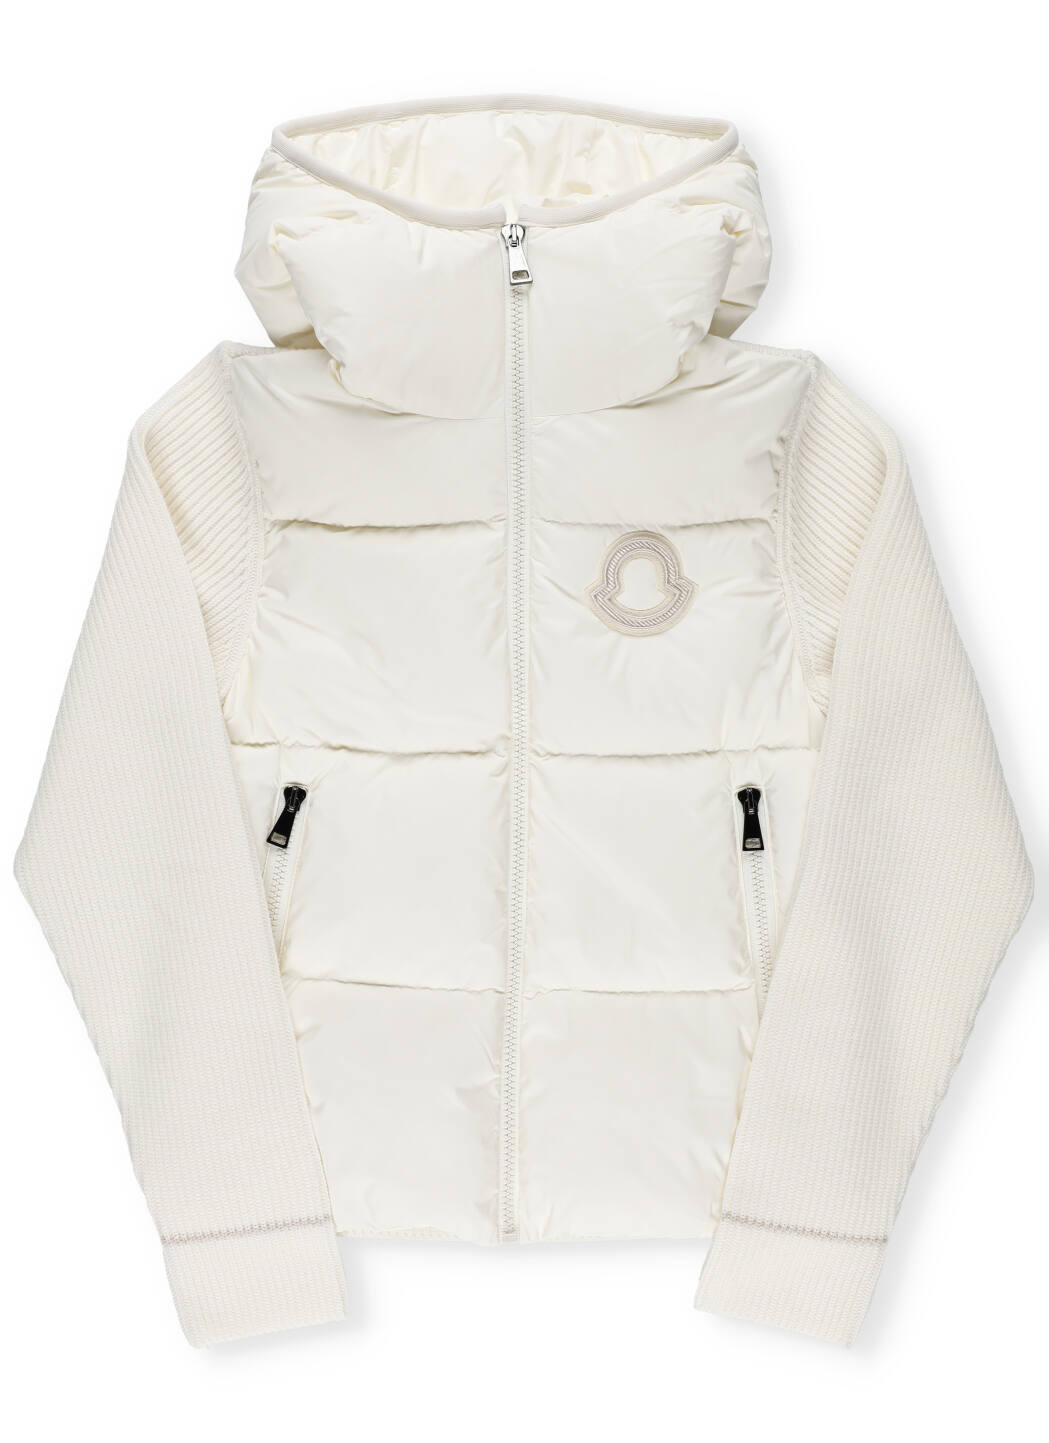 MONCLER PADDED JACKET WITH LOGO,9B50810 T A9627002